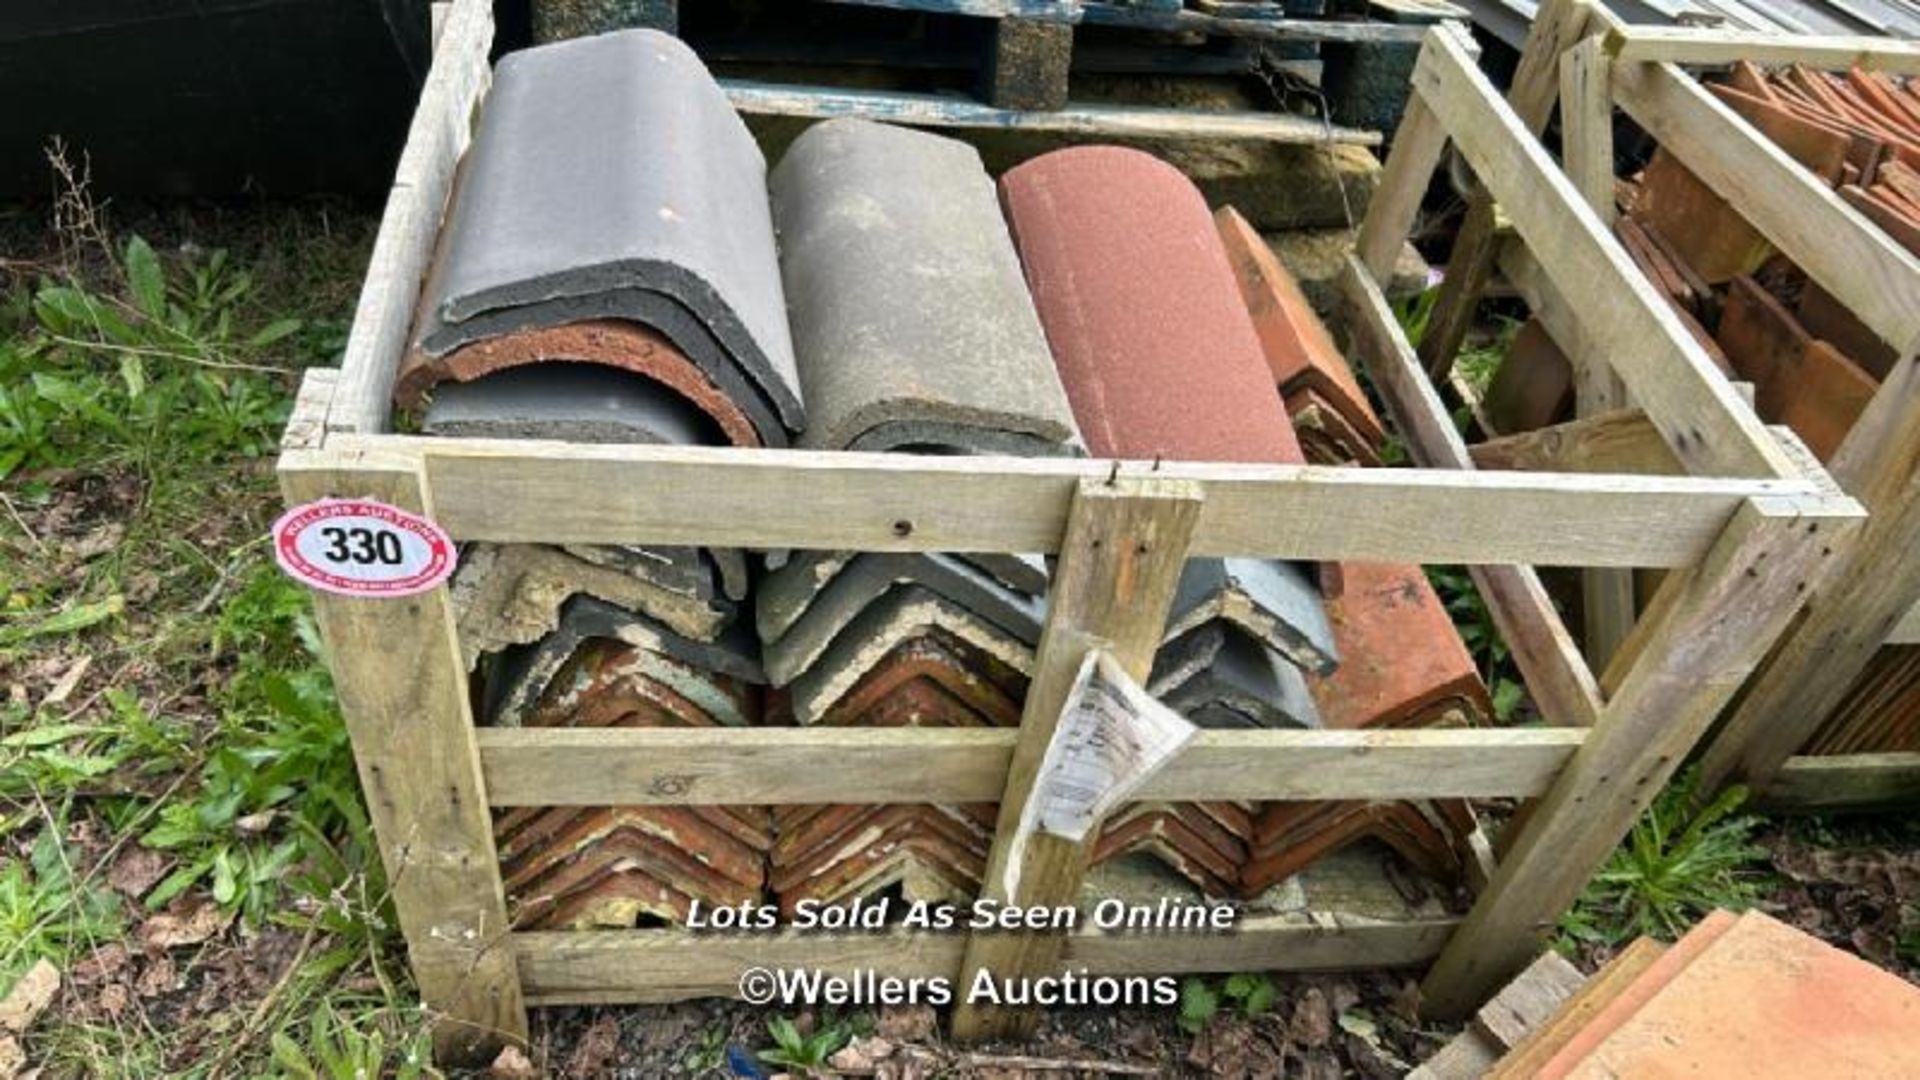 CRATE OF ASSORTED RIDGE TILES, MOSTLY 18", 90-130 ANGLE